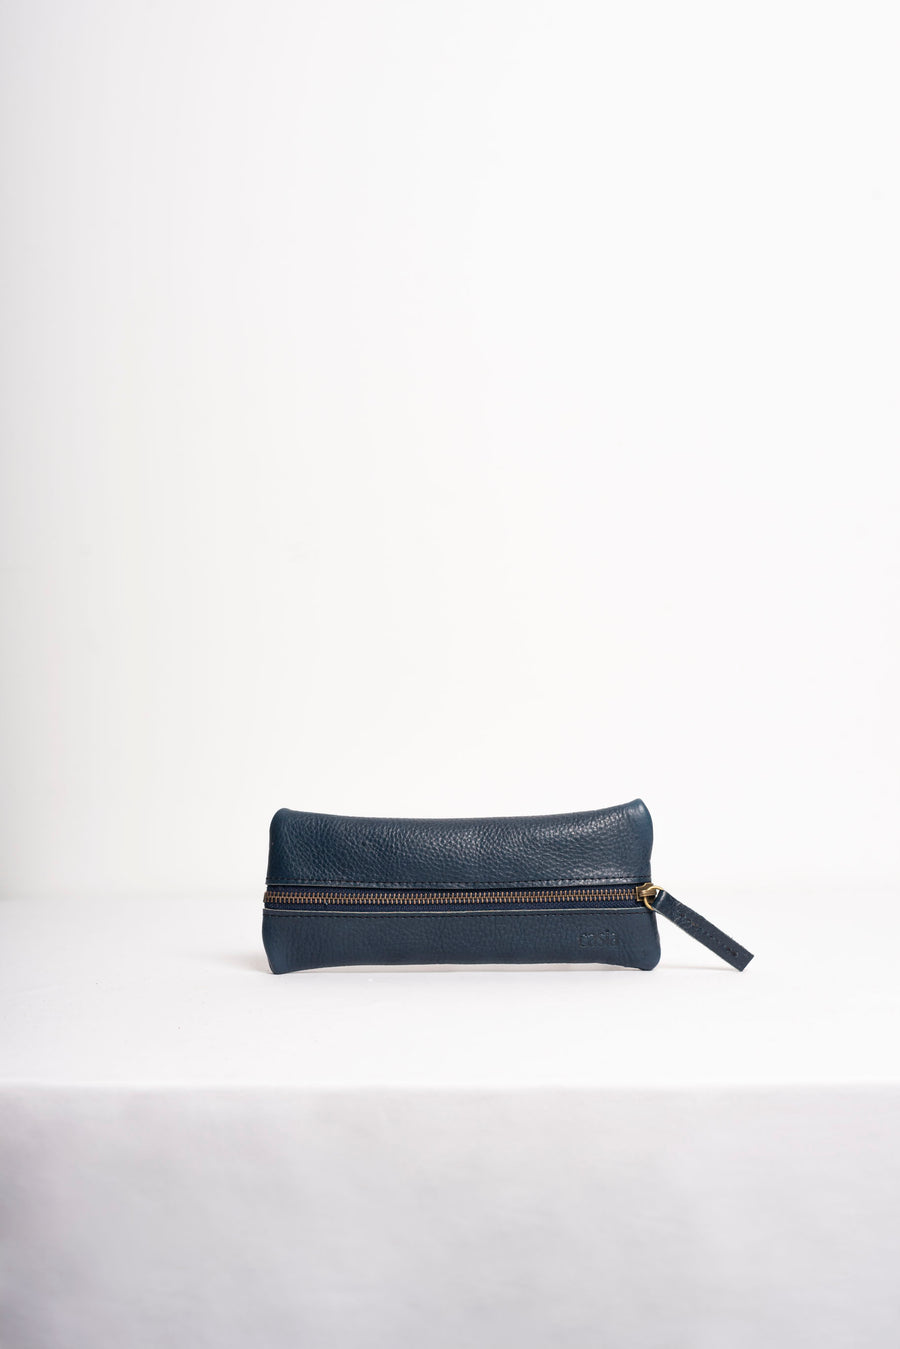 Full grain leather zippered pencil case.